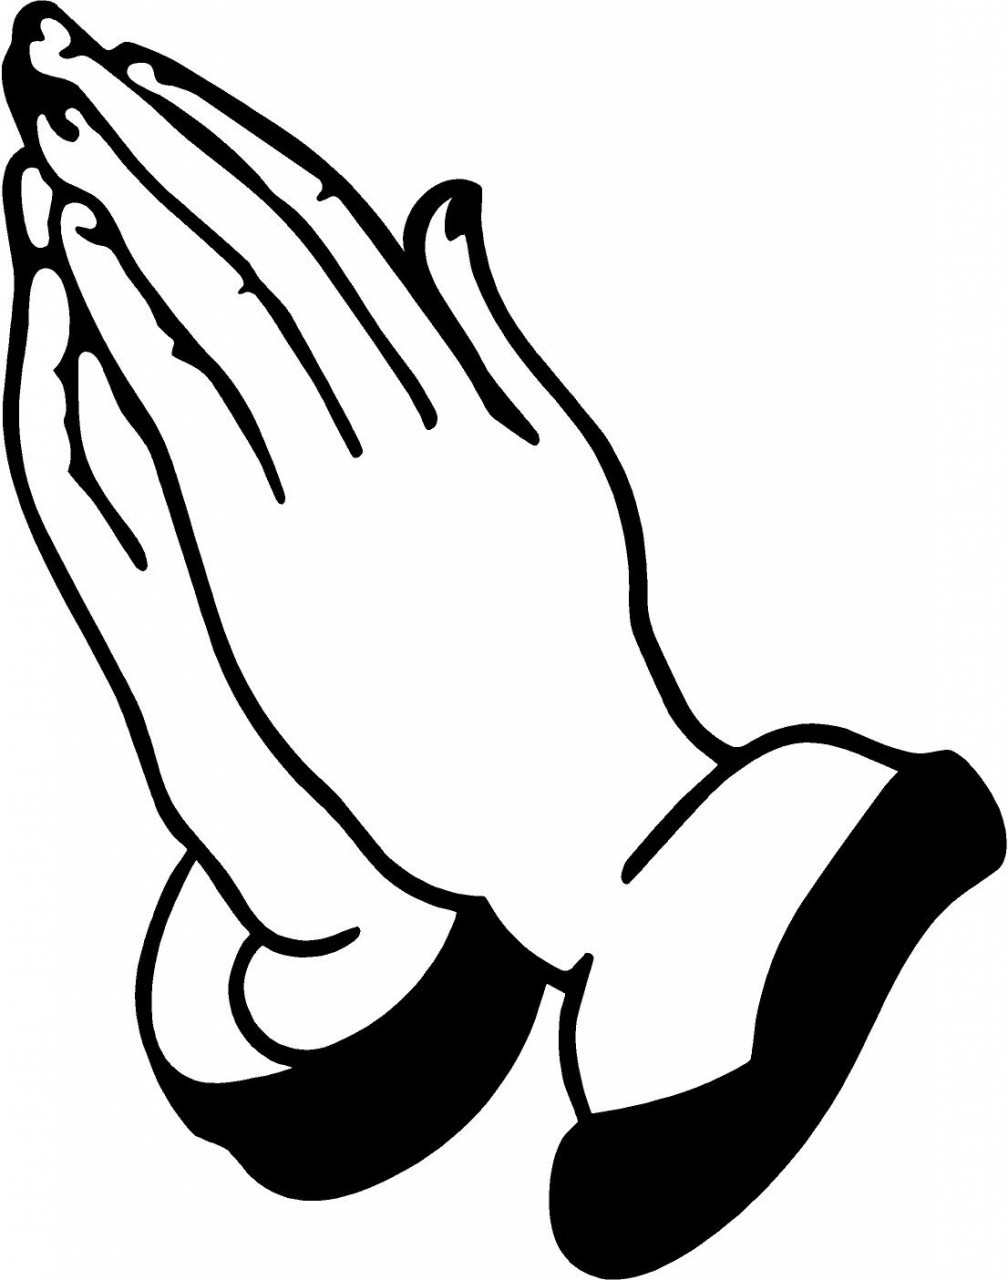 clip art images praying hands - photo #17